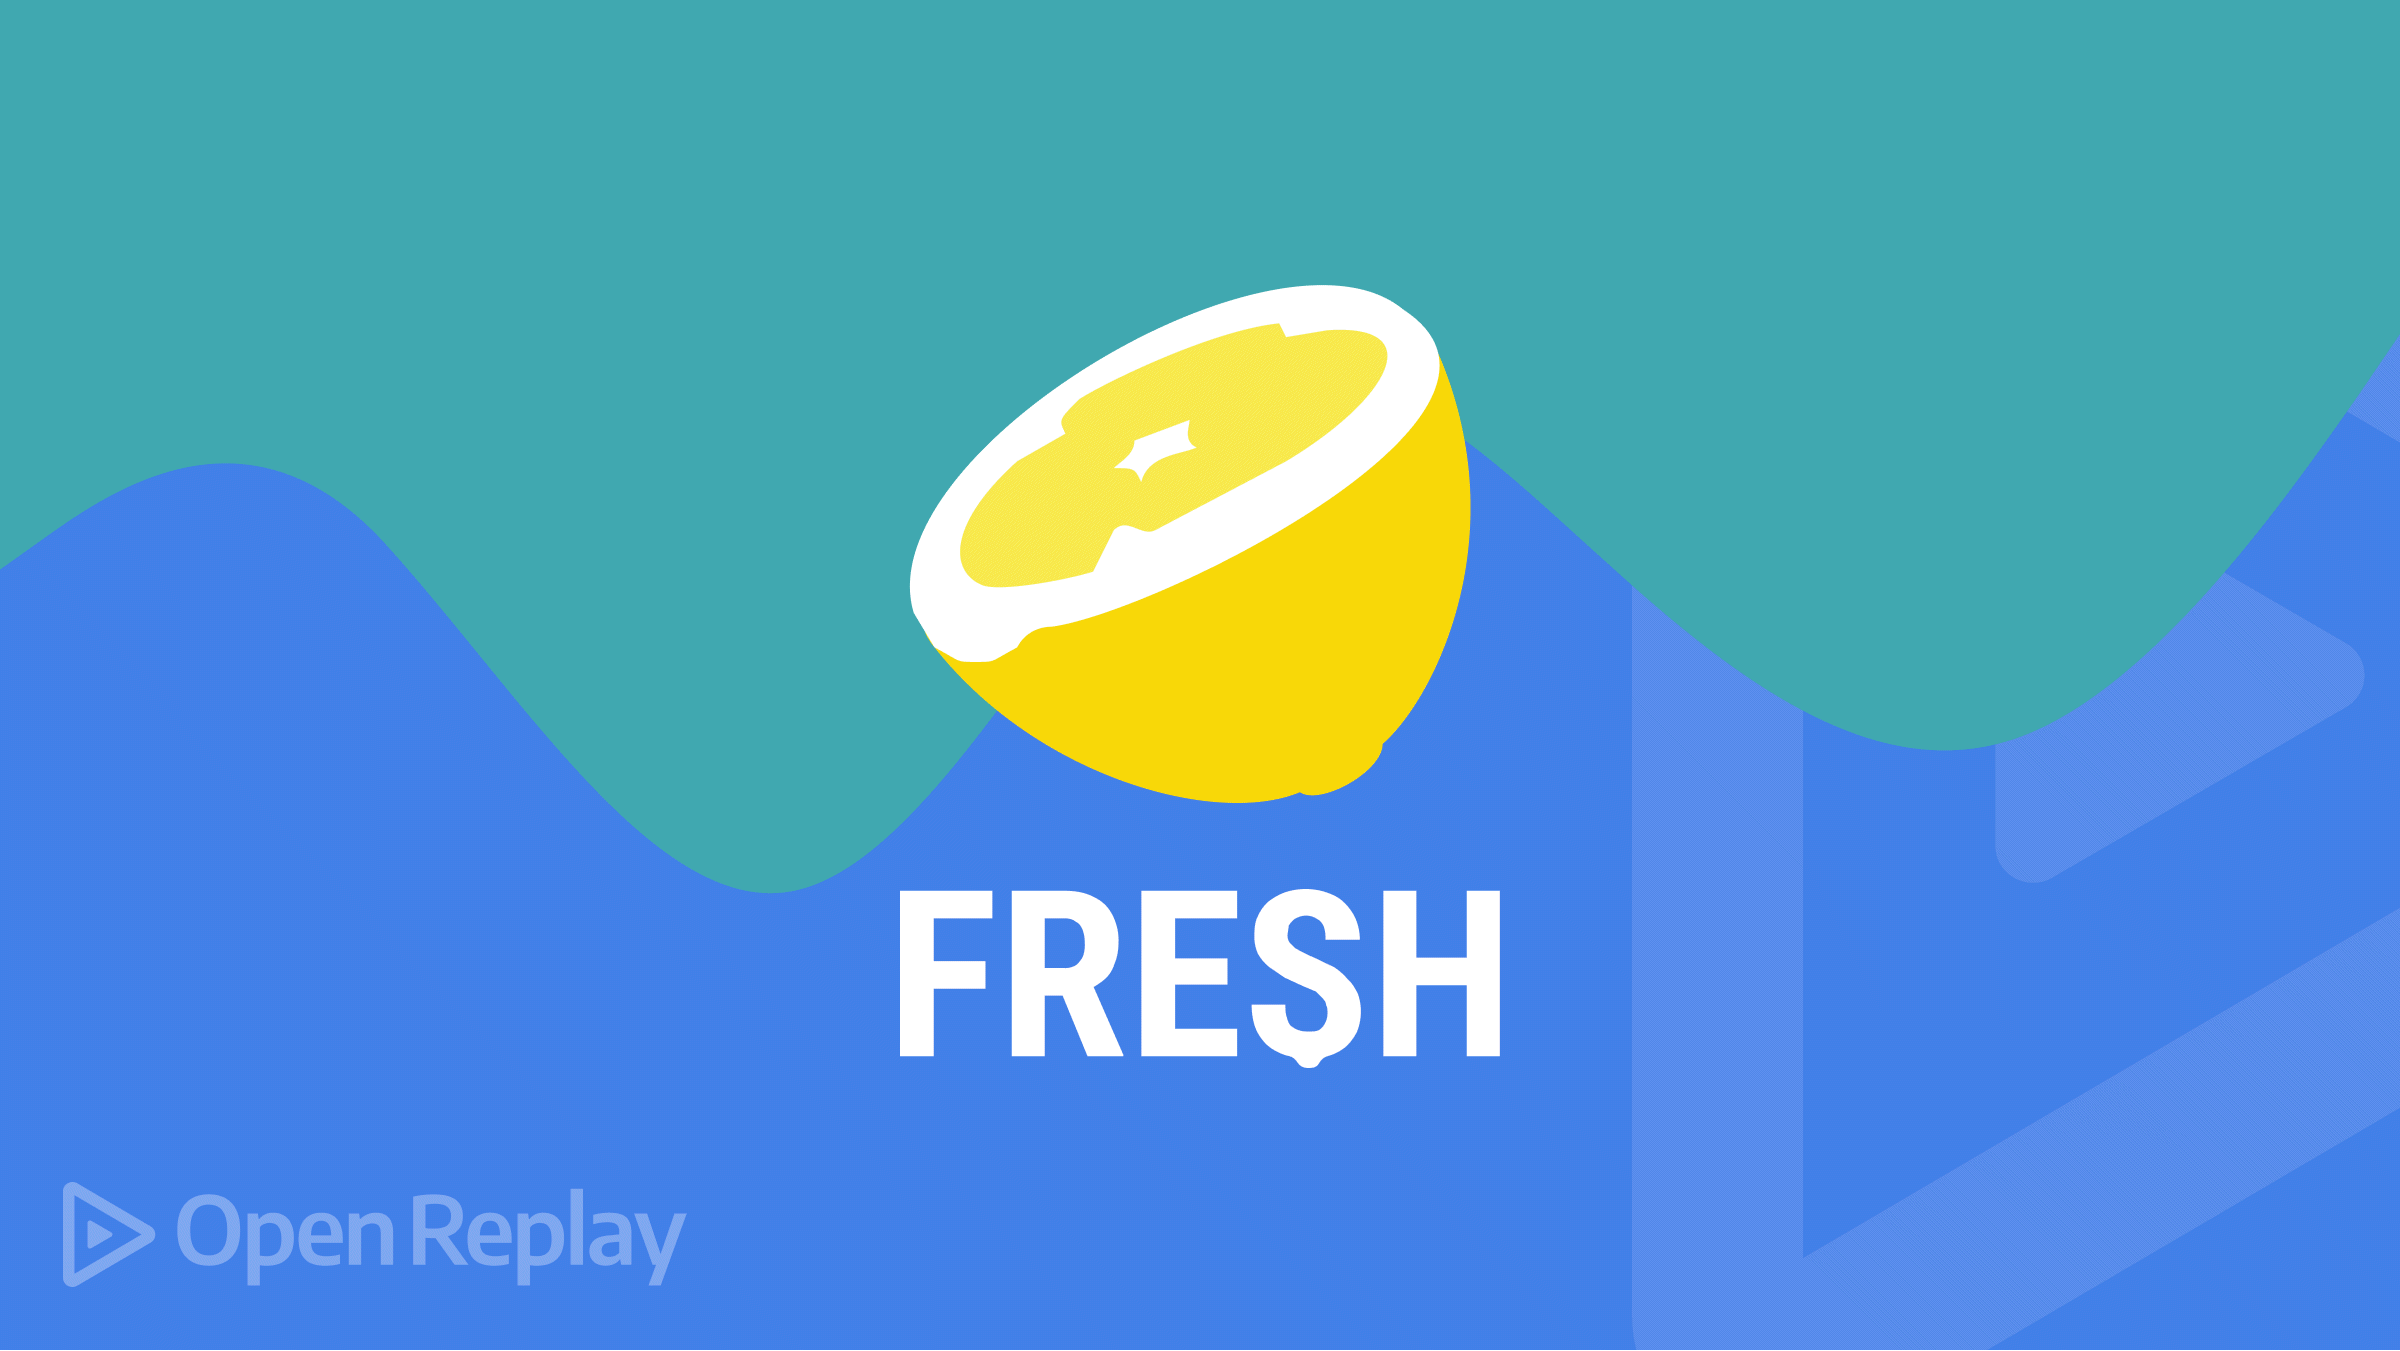 An introduction to Fresh